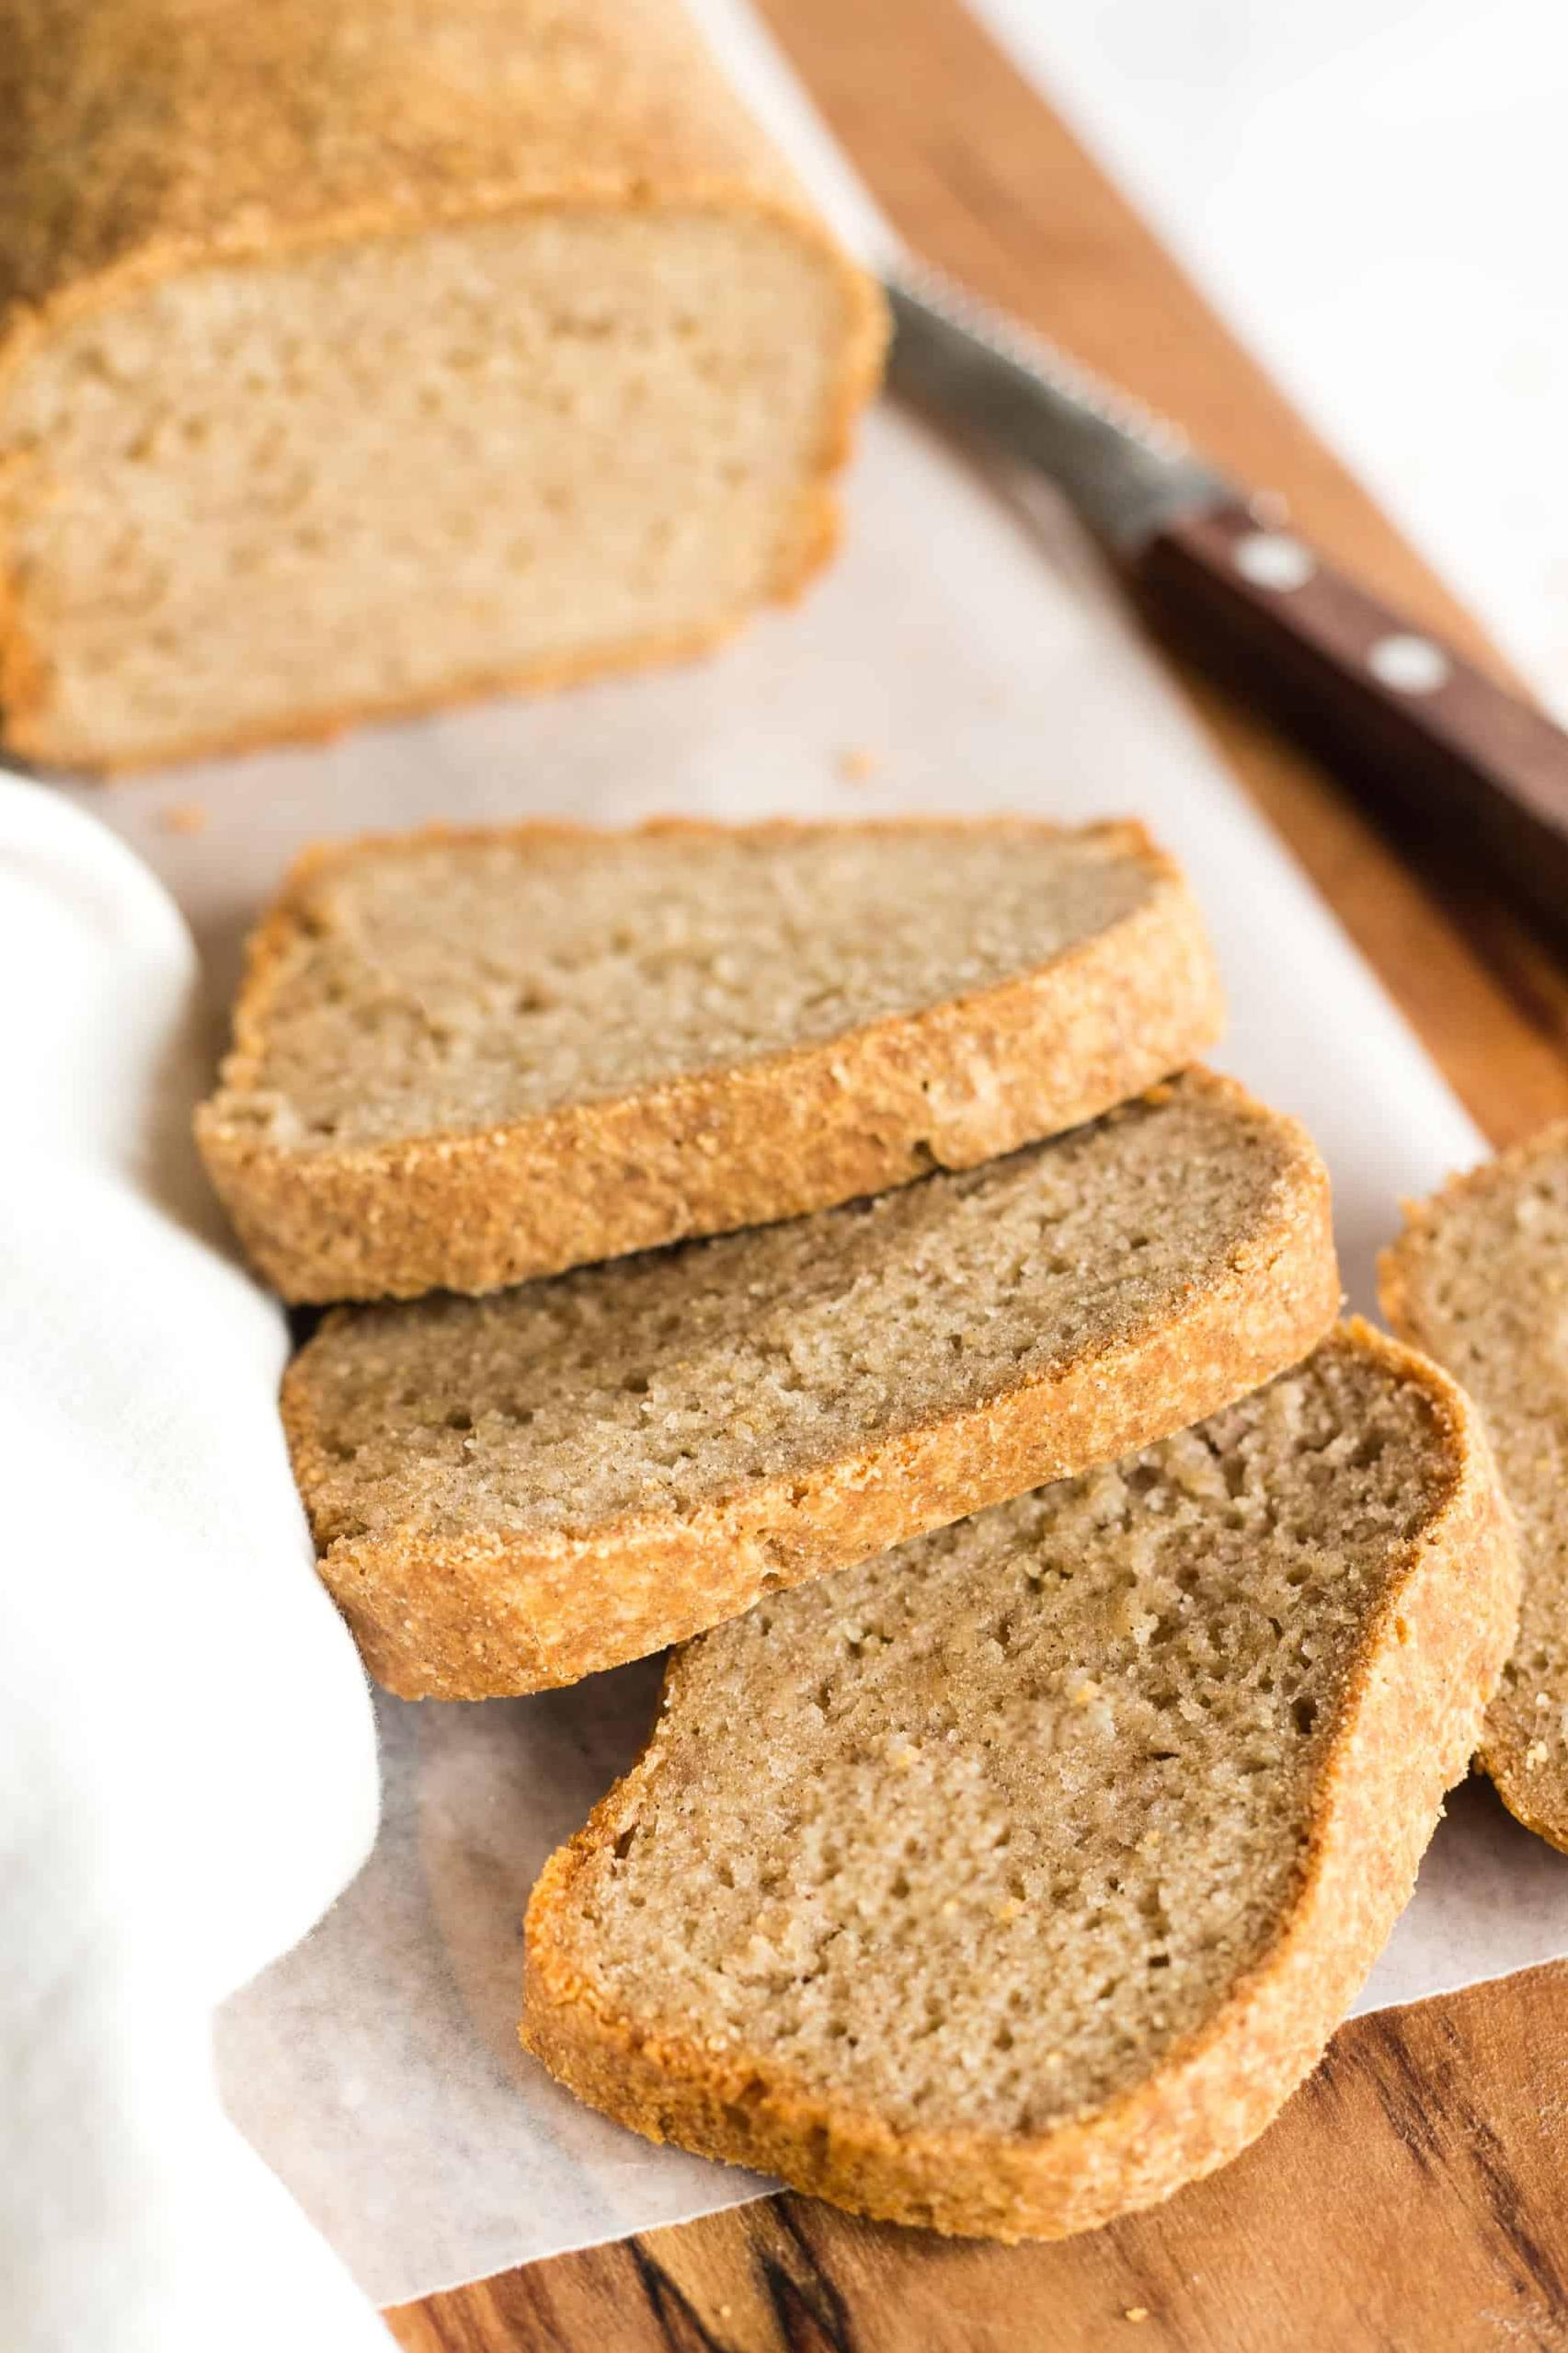  No butter or milk? No problem. This bread is still delicious and healthy!